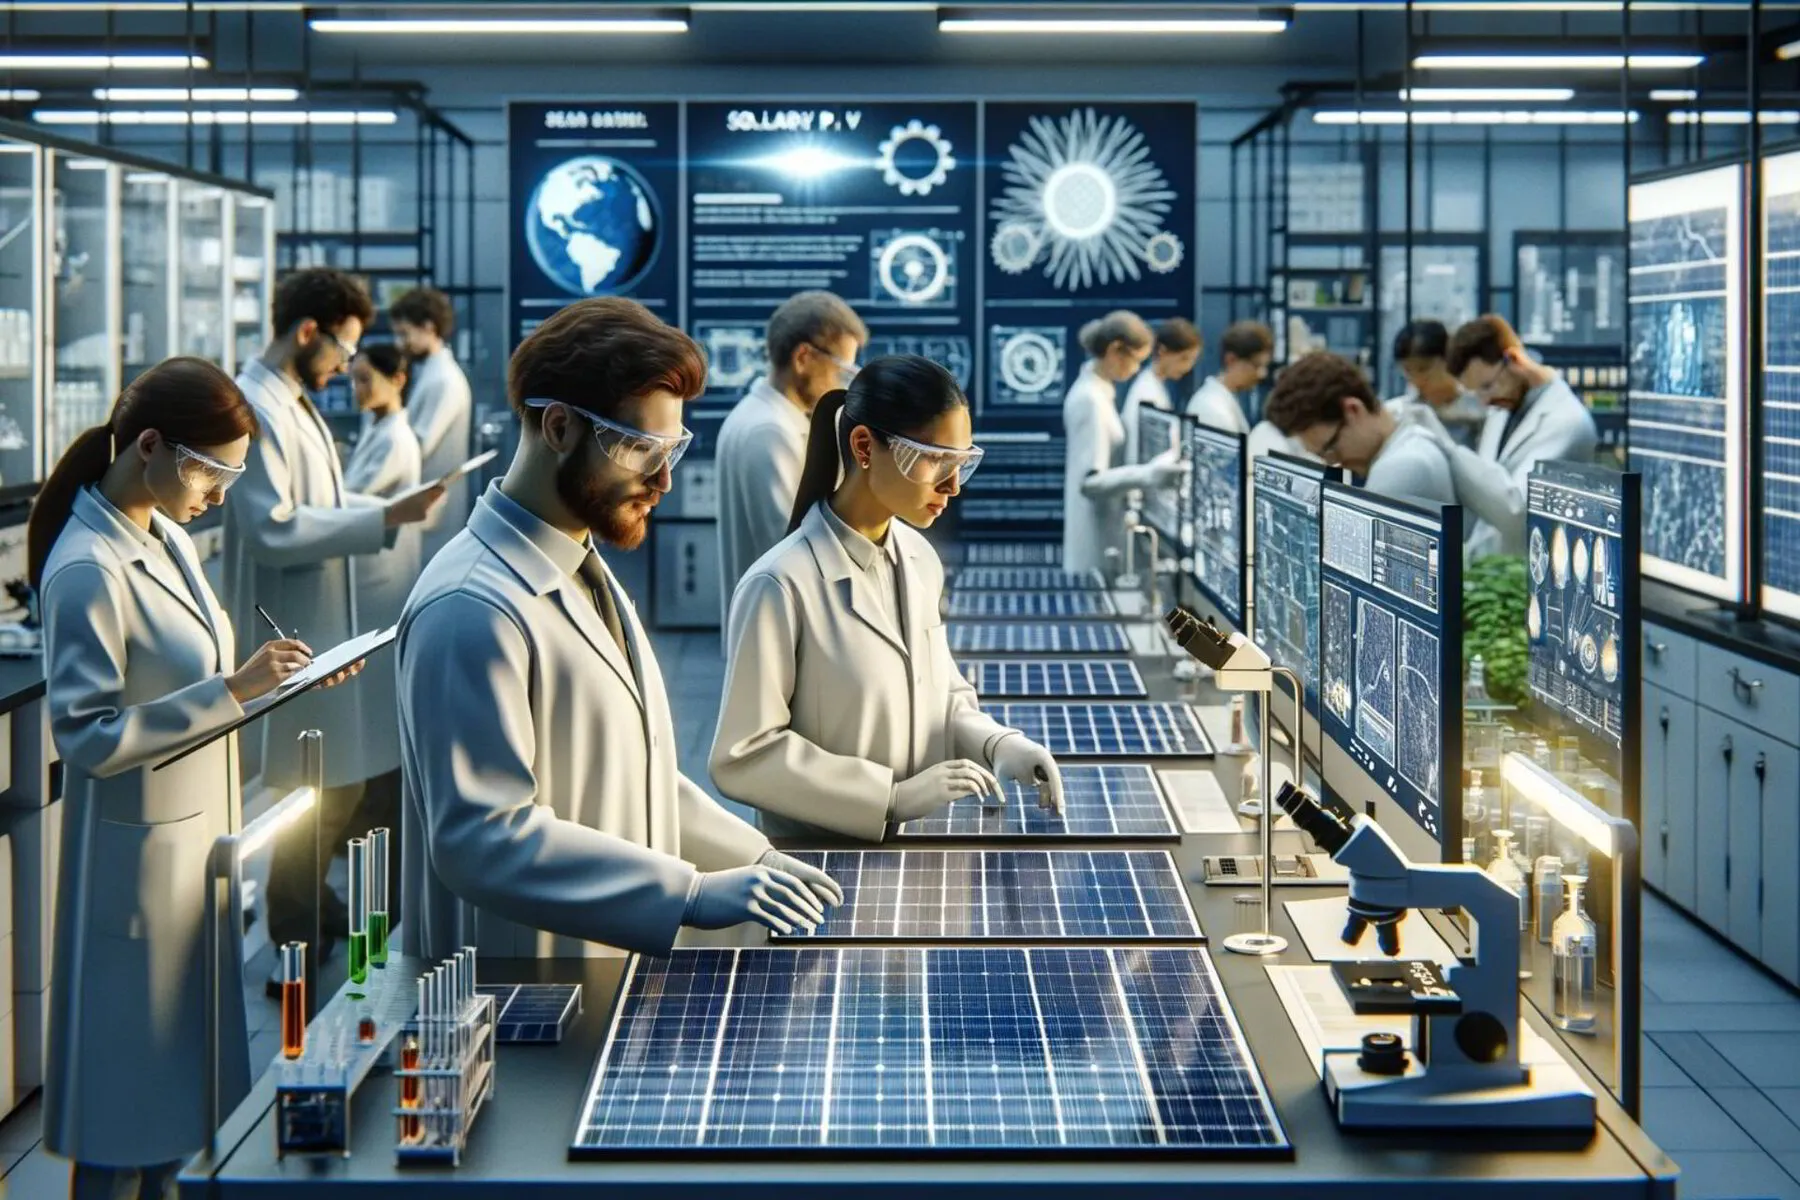 scientists in a laboratory working on solar photovoltaic (PV) panels